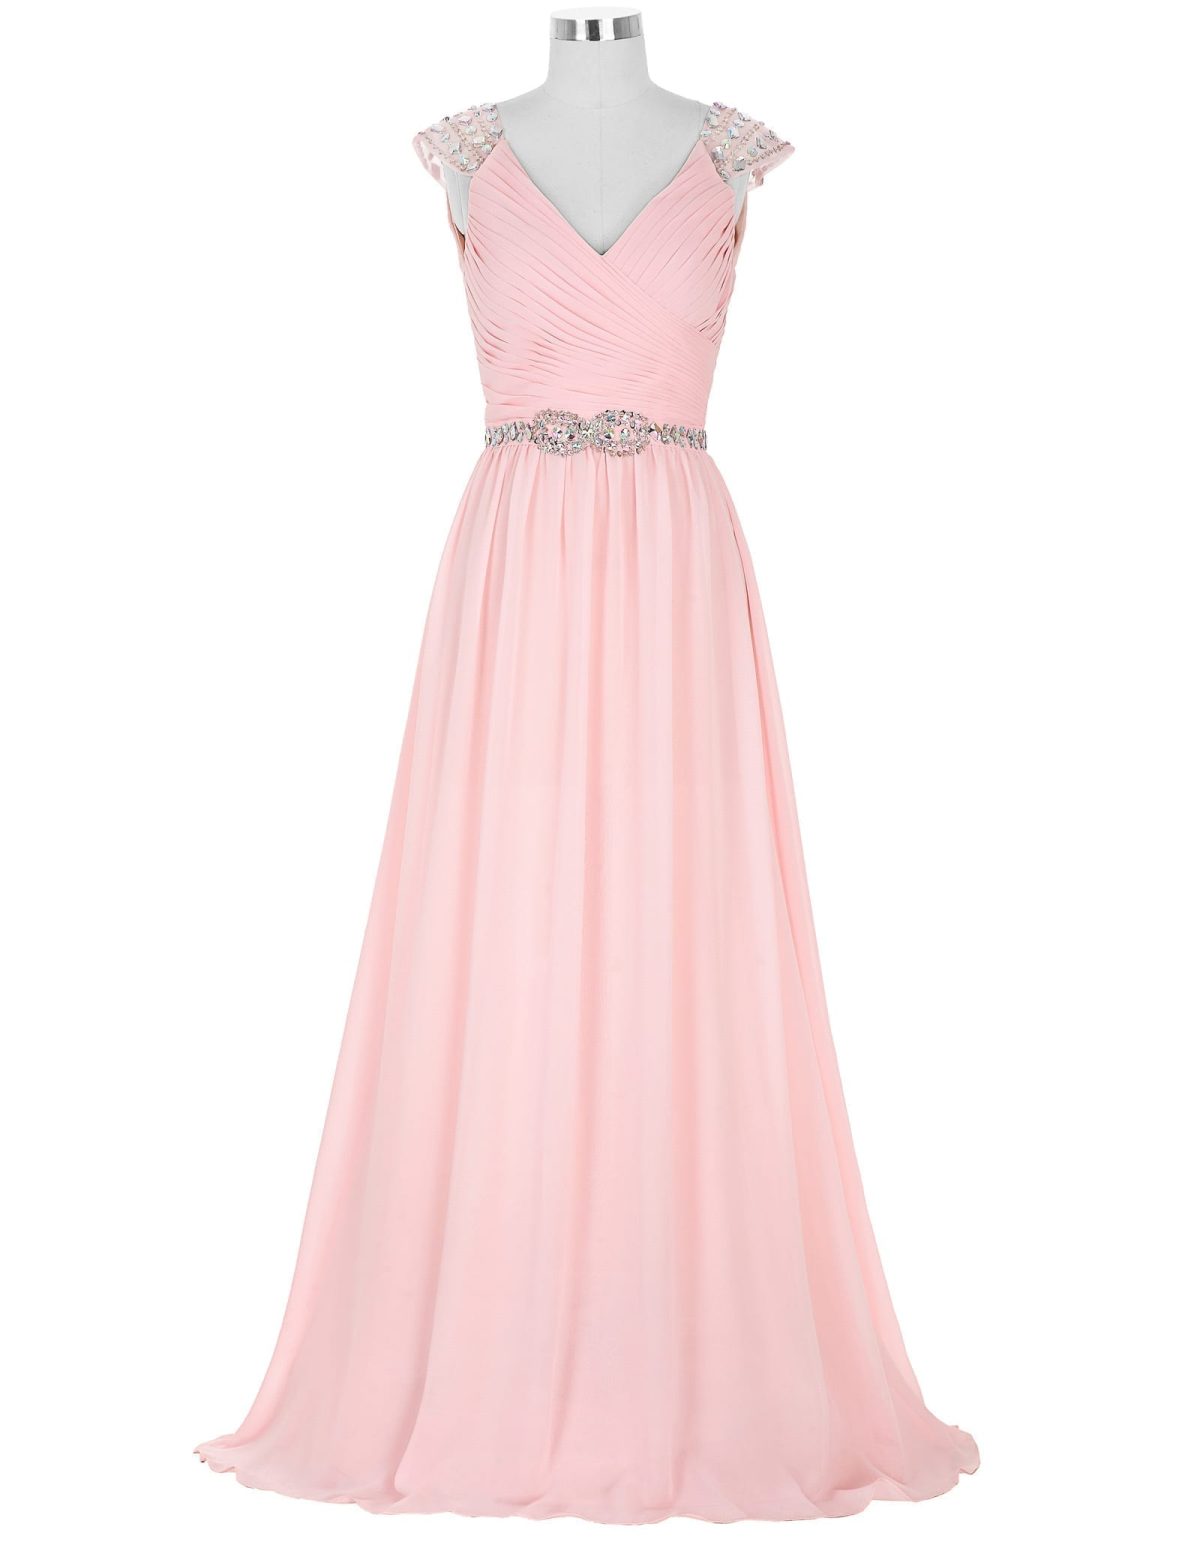 Pink Chiffon V Neck Beaded A Line Capped Sleeve Maid Of Honor Long Bridesmaid Dress in Bridesmaid dresses